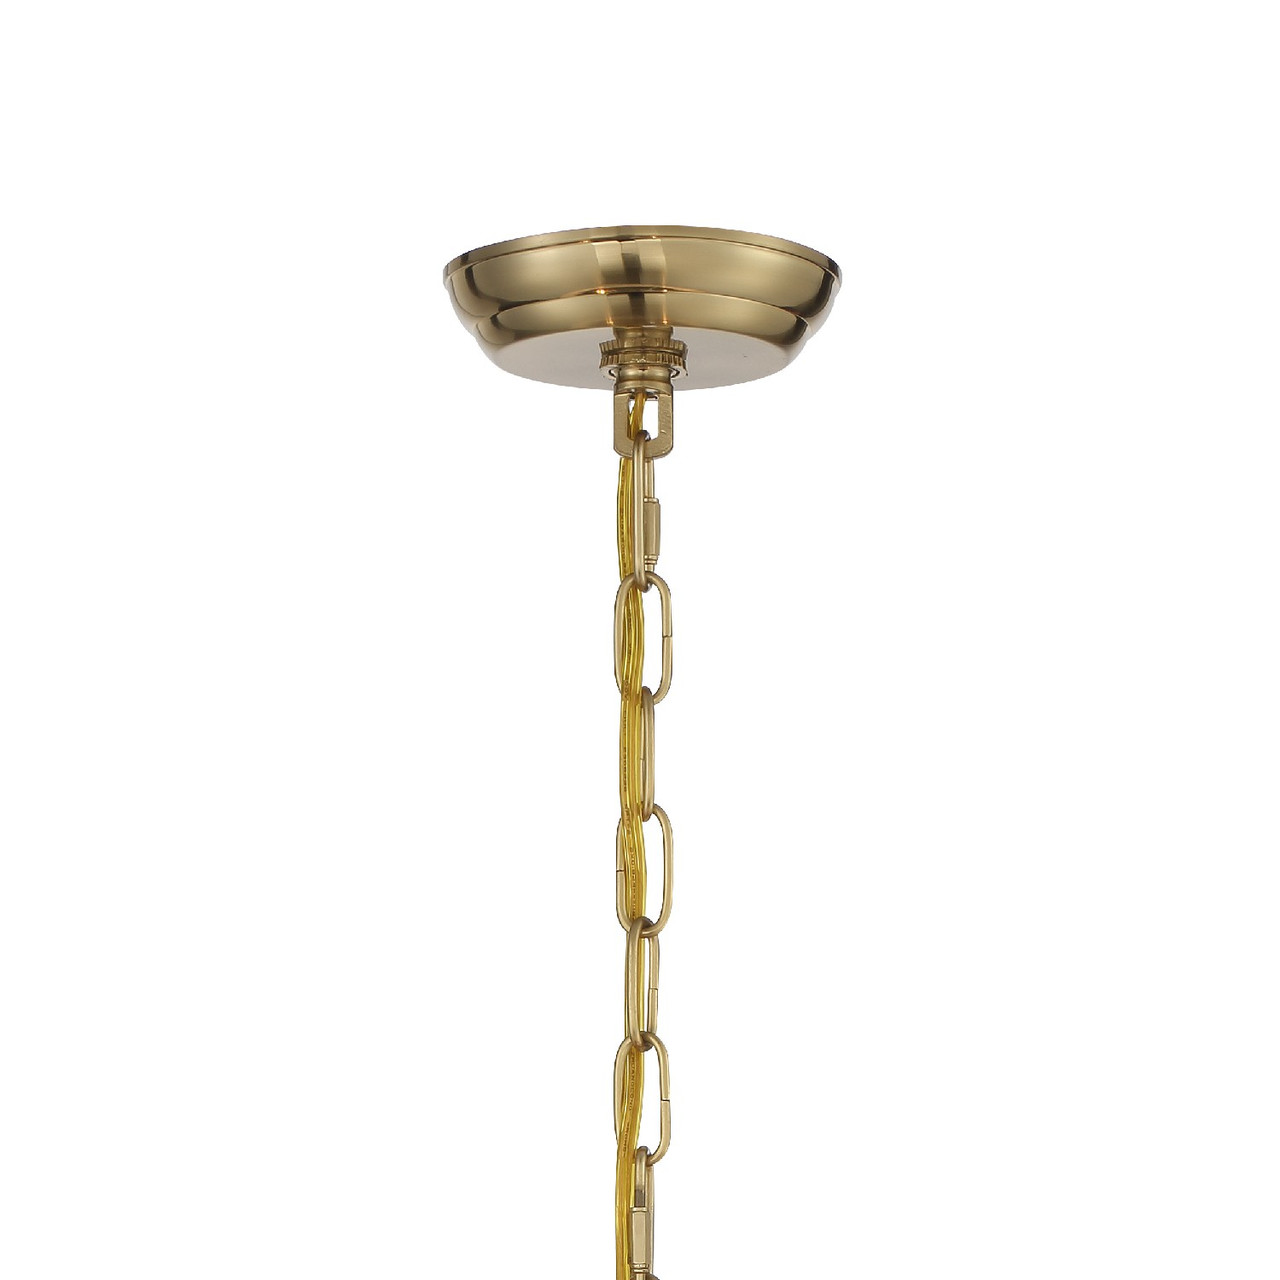 CRYSTORAMA 6625-VG-CL-MWP Othello 5 Light Vibrant Gold Chandelier